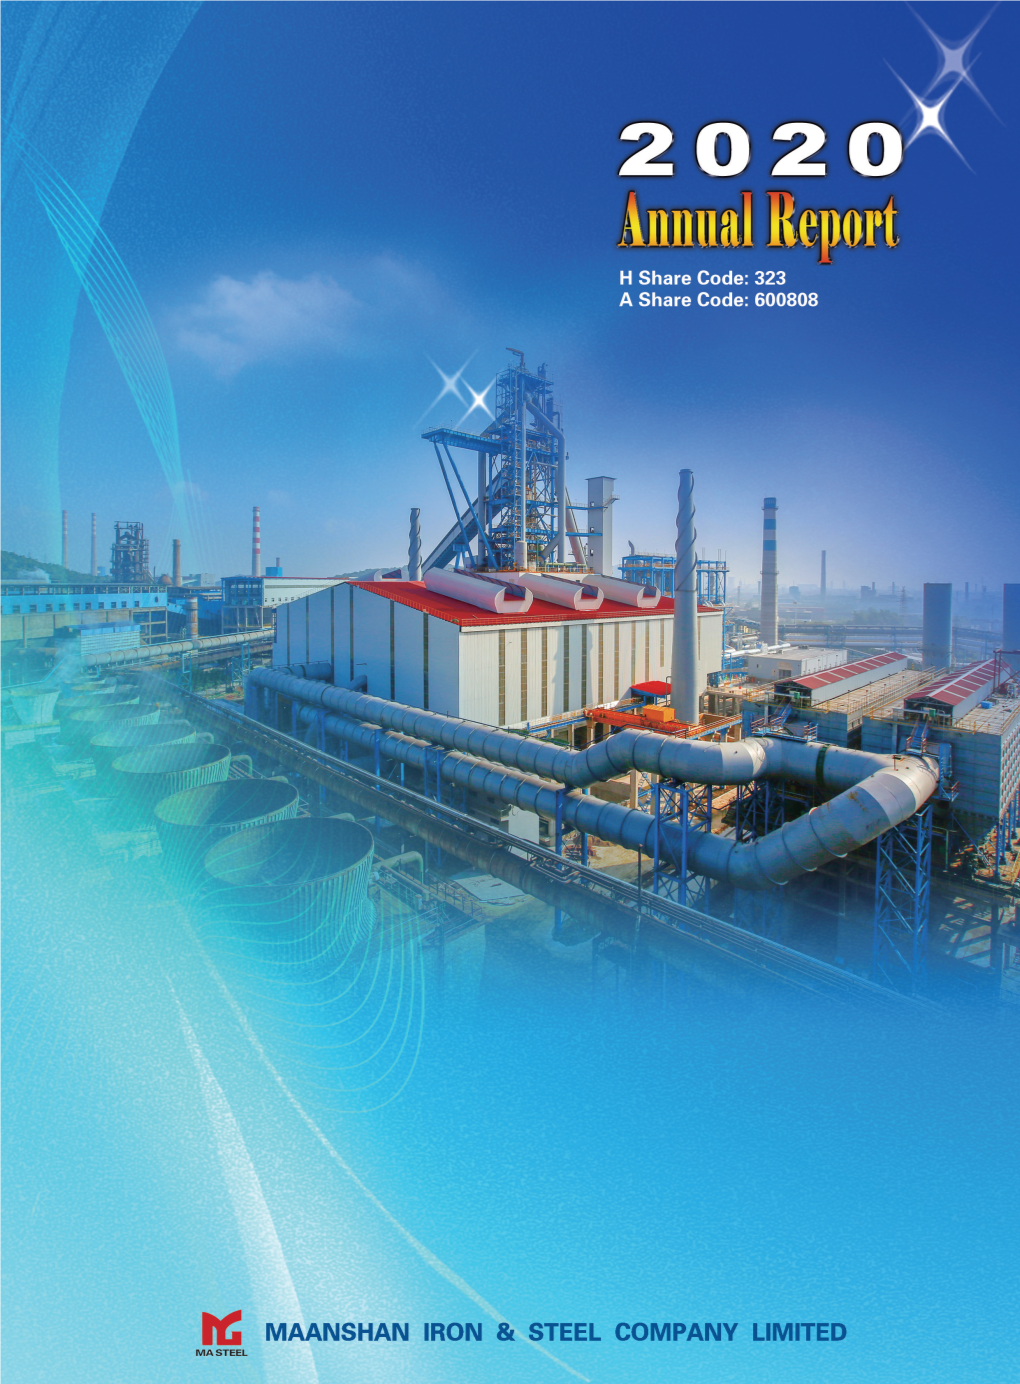 Annual Report; and Jointly and Severally Accept Full Responsibility for the Truthfulness, Accuracy and Completeness of the Information Contained in This Annual Report